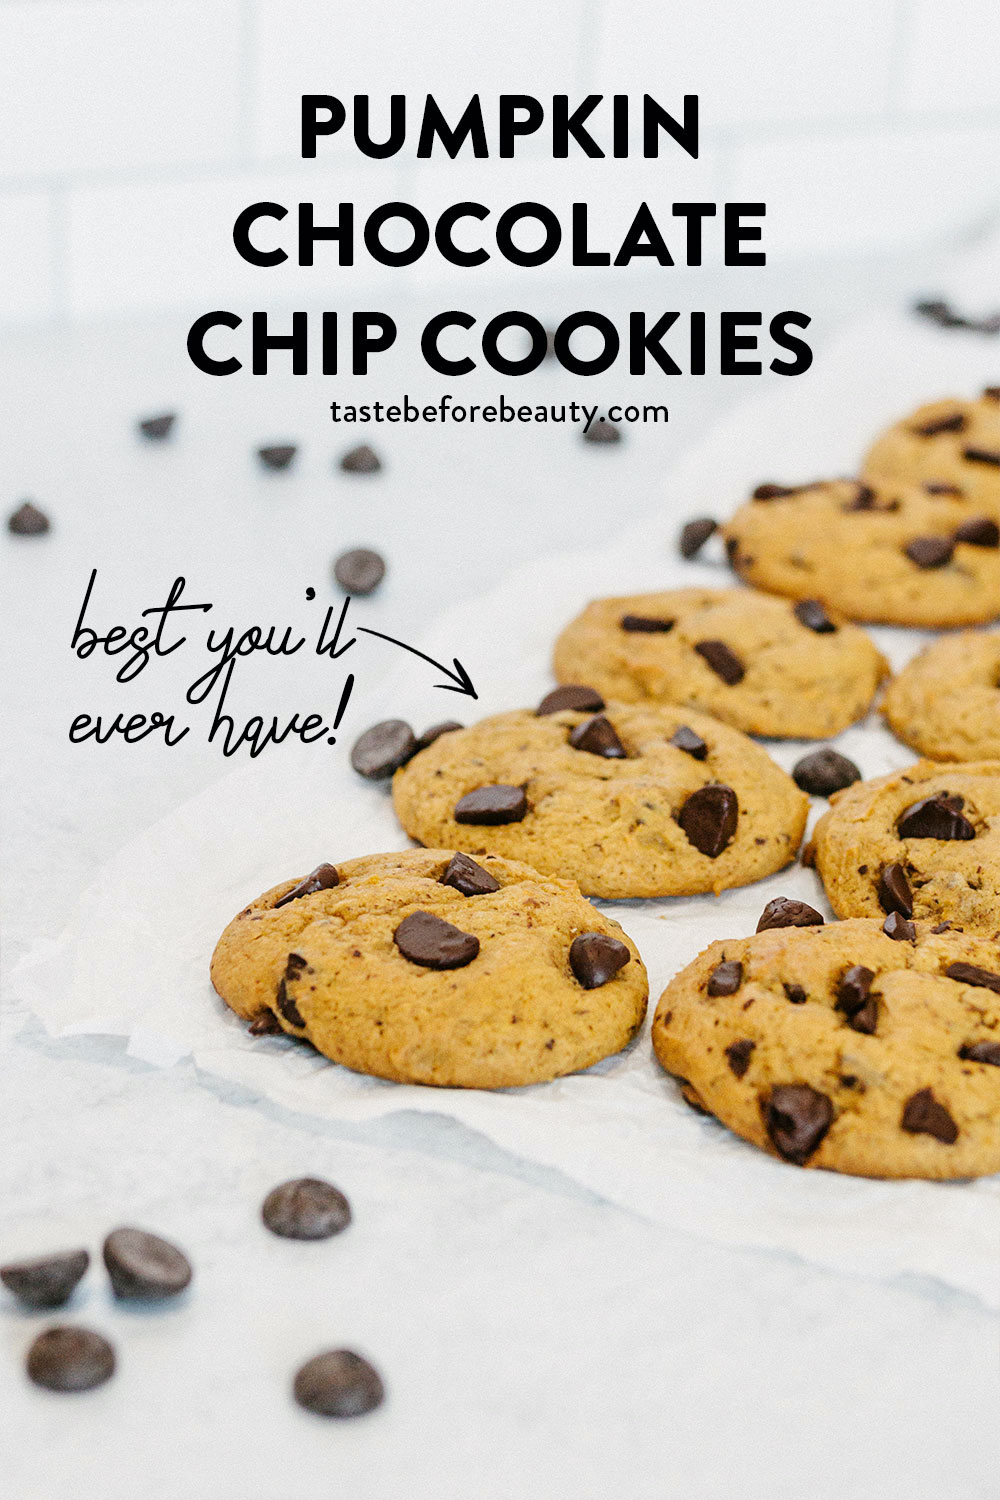 taste before beauty pumpkin chocolate chip cookies on parchment paper with chocolate chips pinterest pin